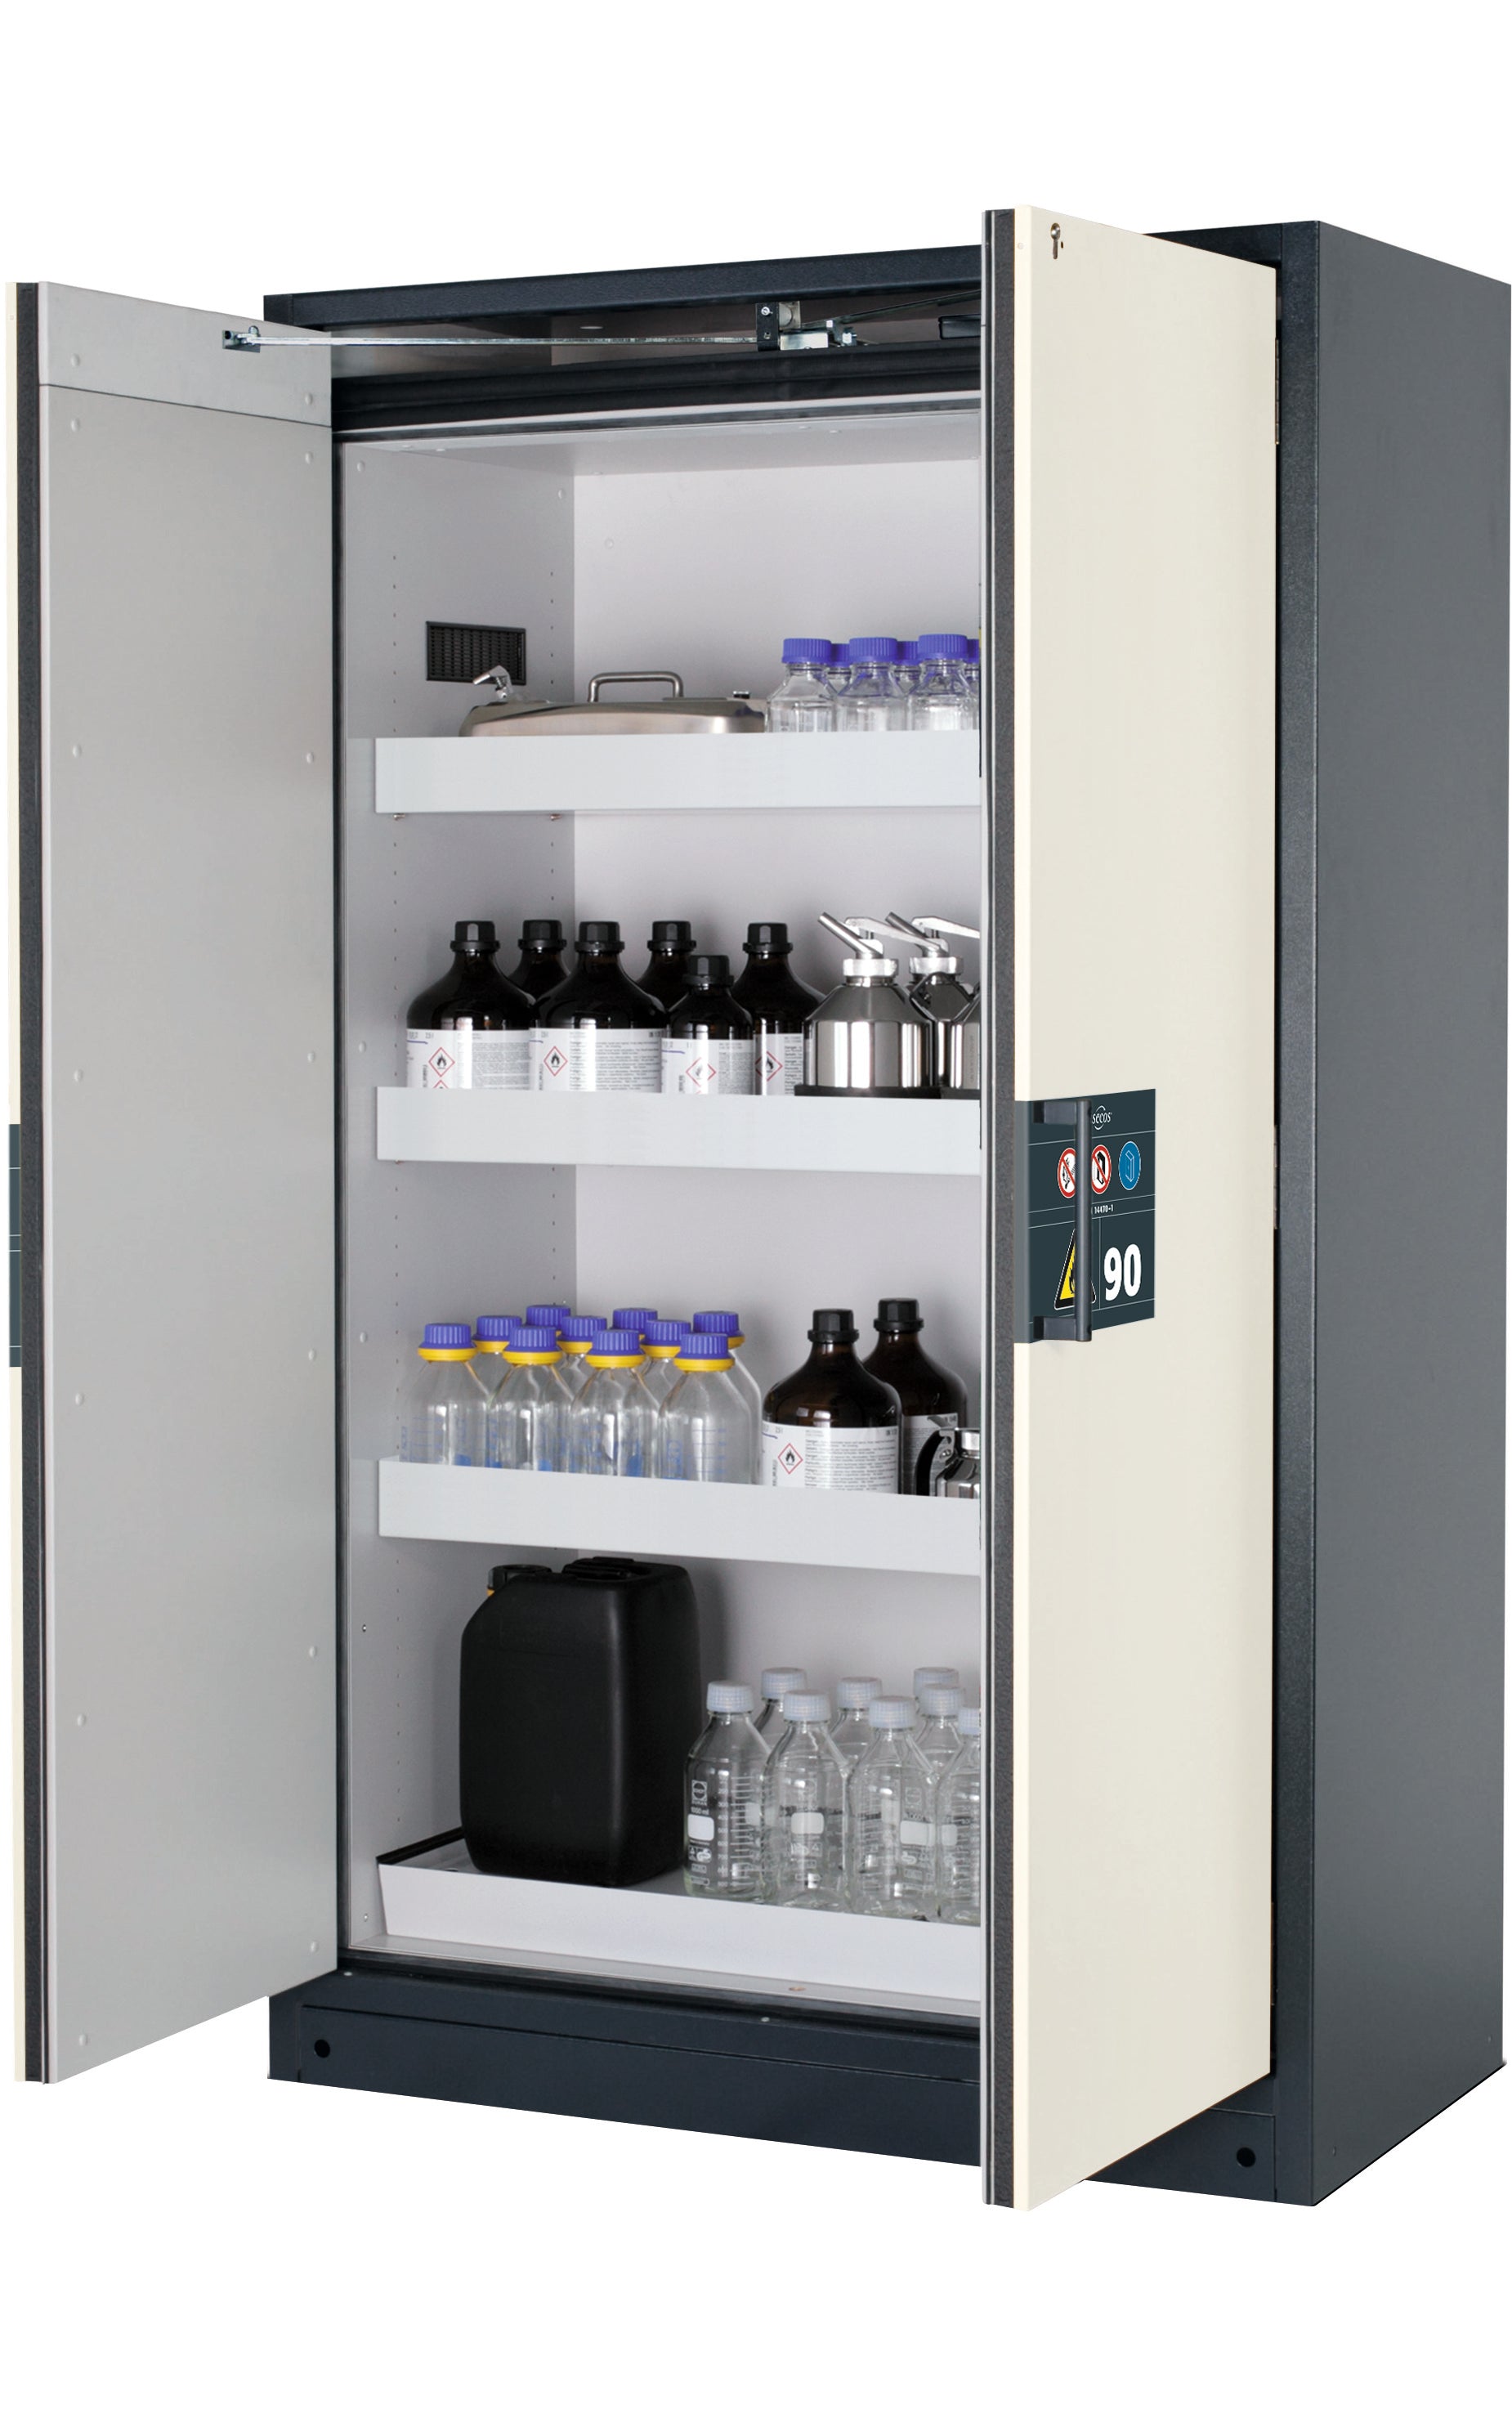 Type 90 safety storage cabinet Q-PEGASUS-90 model Q90.195.120.WDAC in pure white RAL 9010 with 3x tray shelf (standard) (sheet steel),